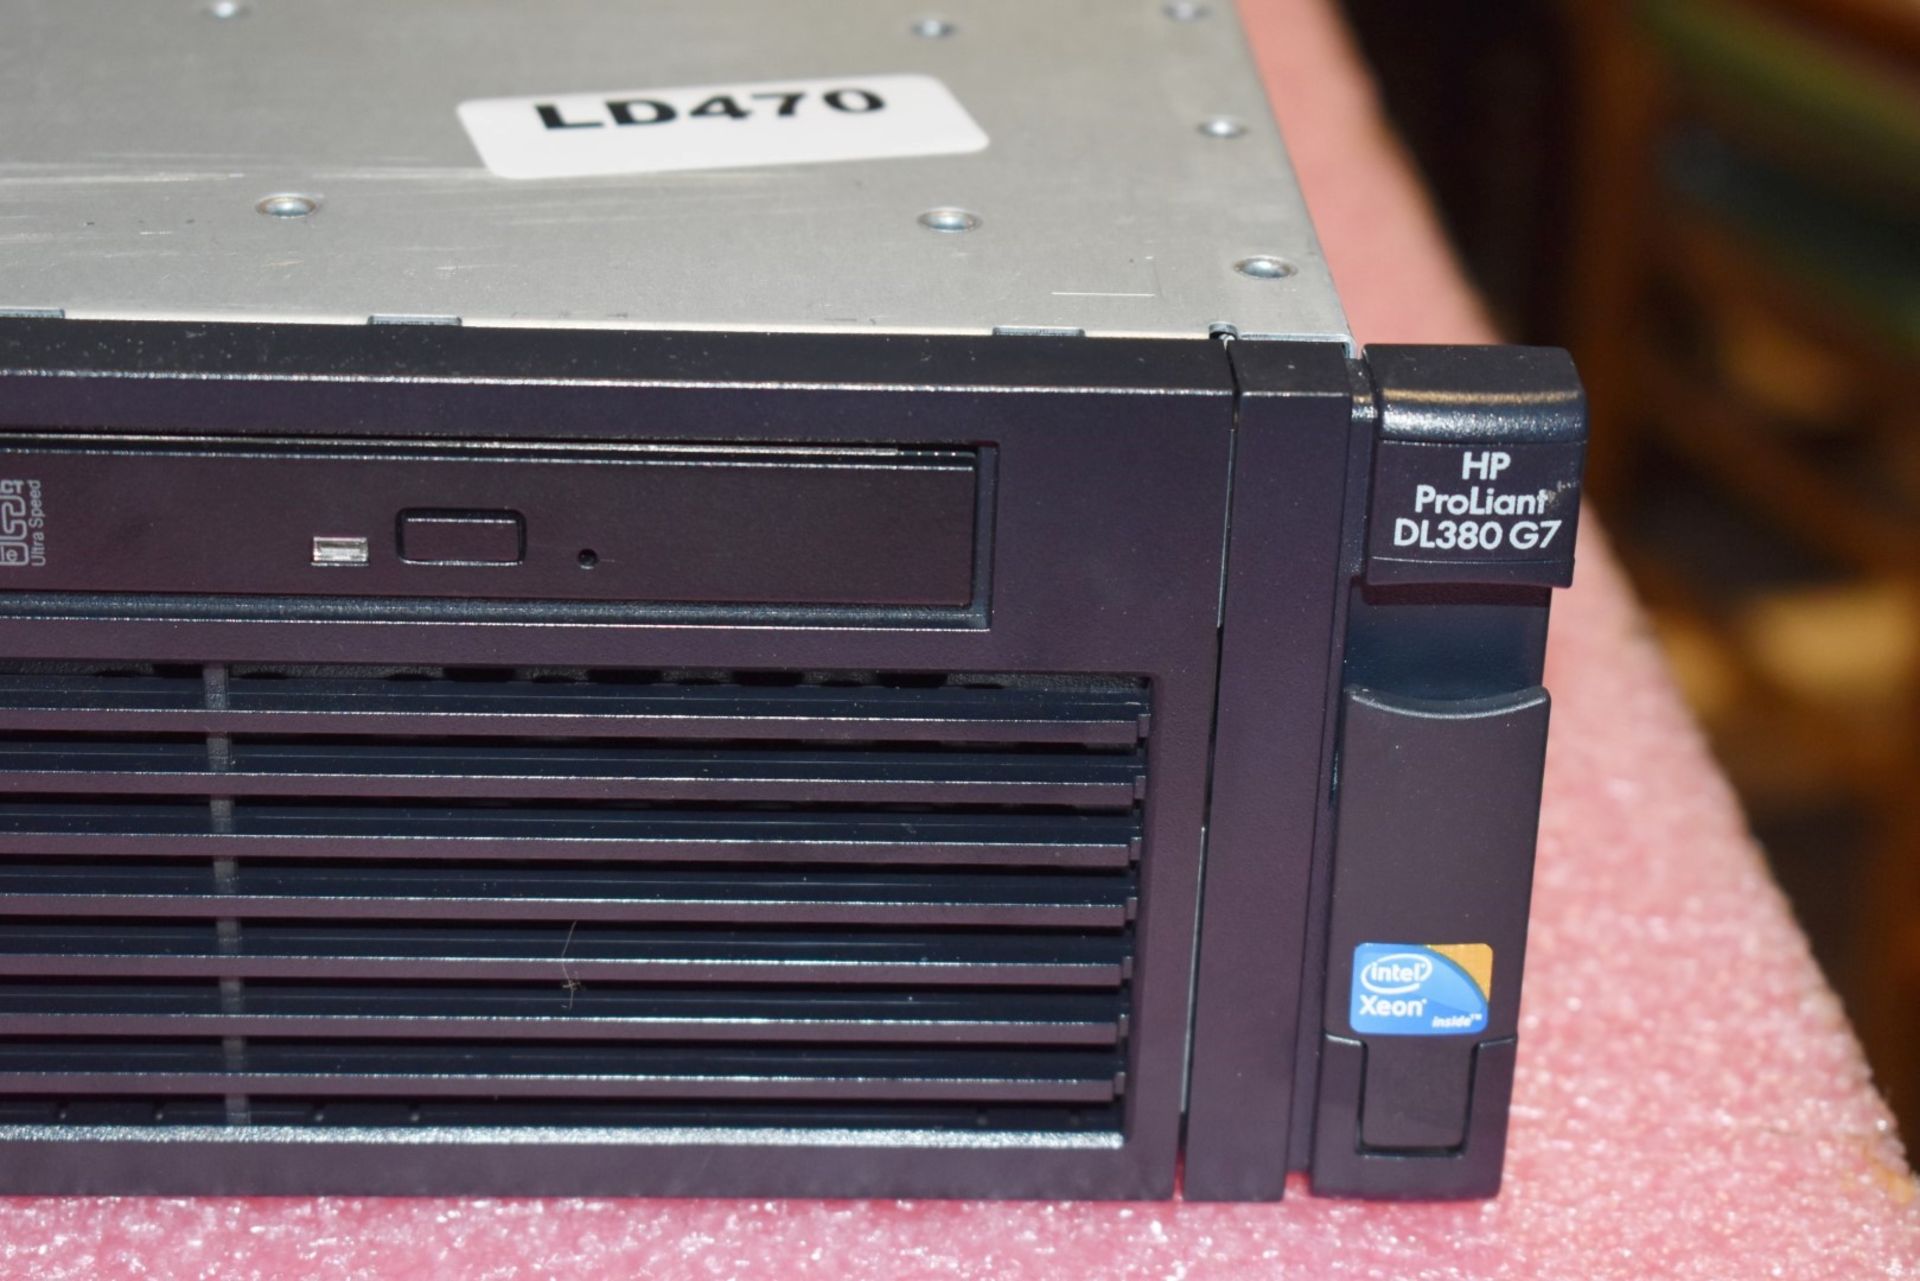 1 x HP ProLiant DL380 G7 Server With 2 x Intel Xeon X5650 Six Core 3.06ghz Processors and 84gb Ram - - Image 4 of 7